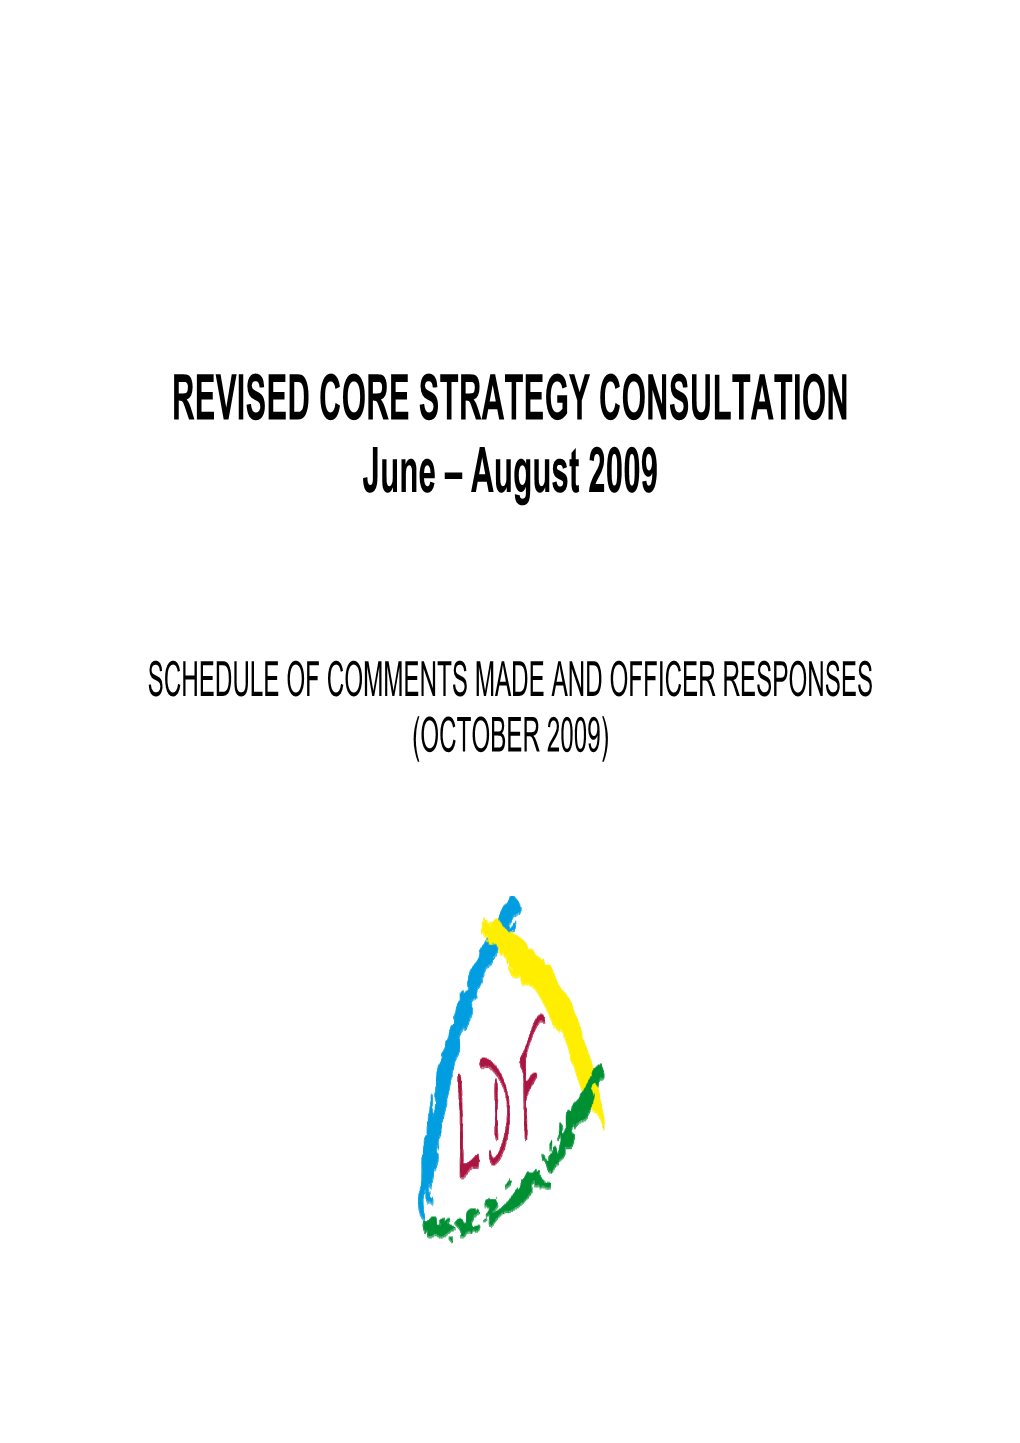 REVISED CORE STRATEGY CONSULTATION June – August 2009